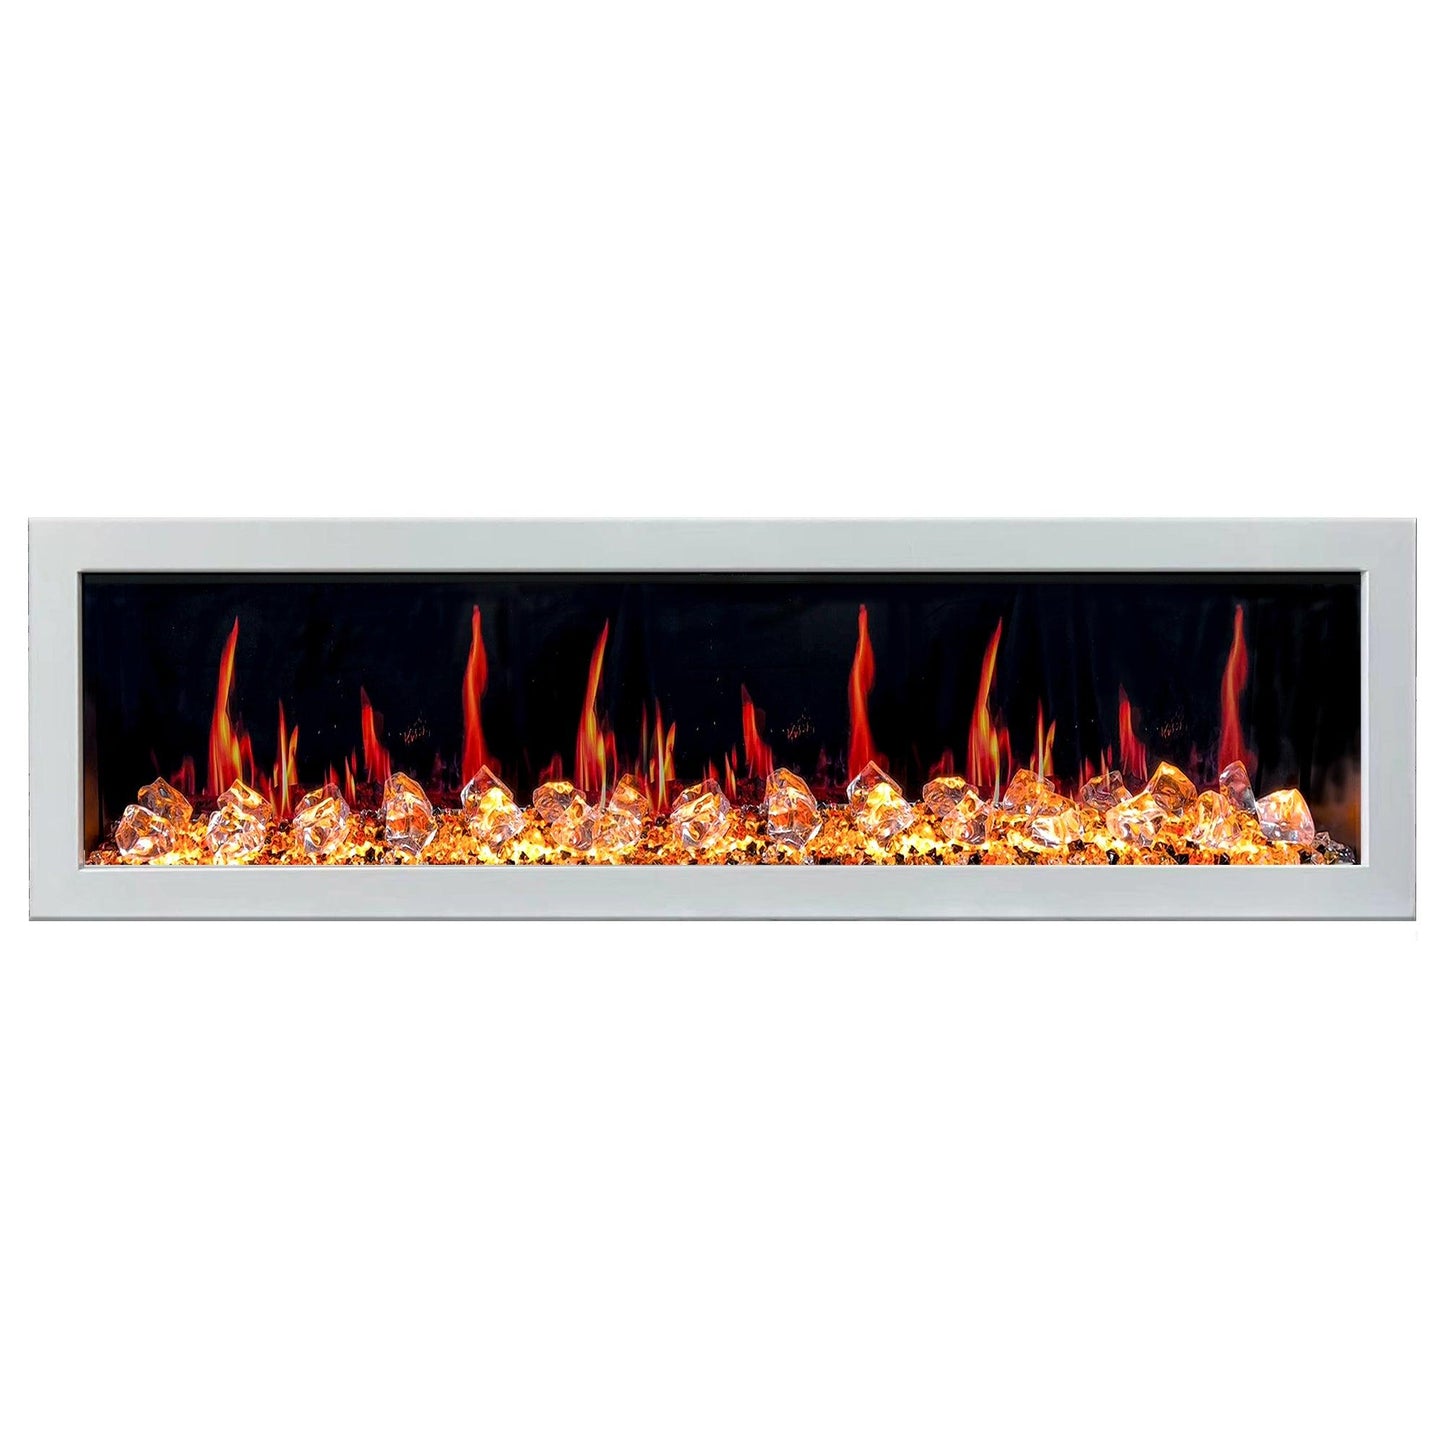 ZopaFlame™ 78" Linear Wall-mount Electric Fireplace - WC19788V - ZopaFlame Fireplaces